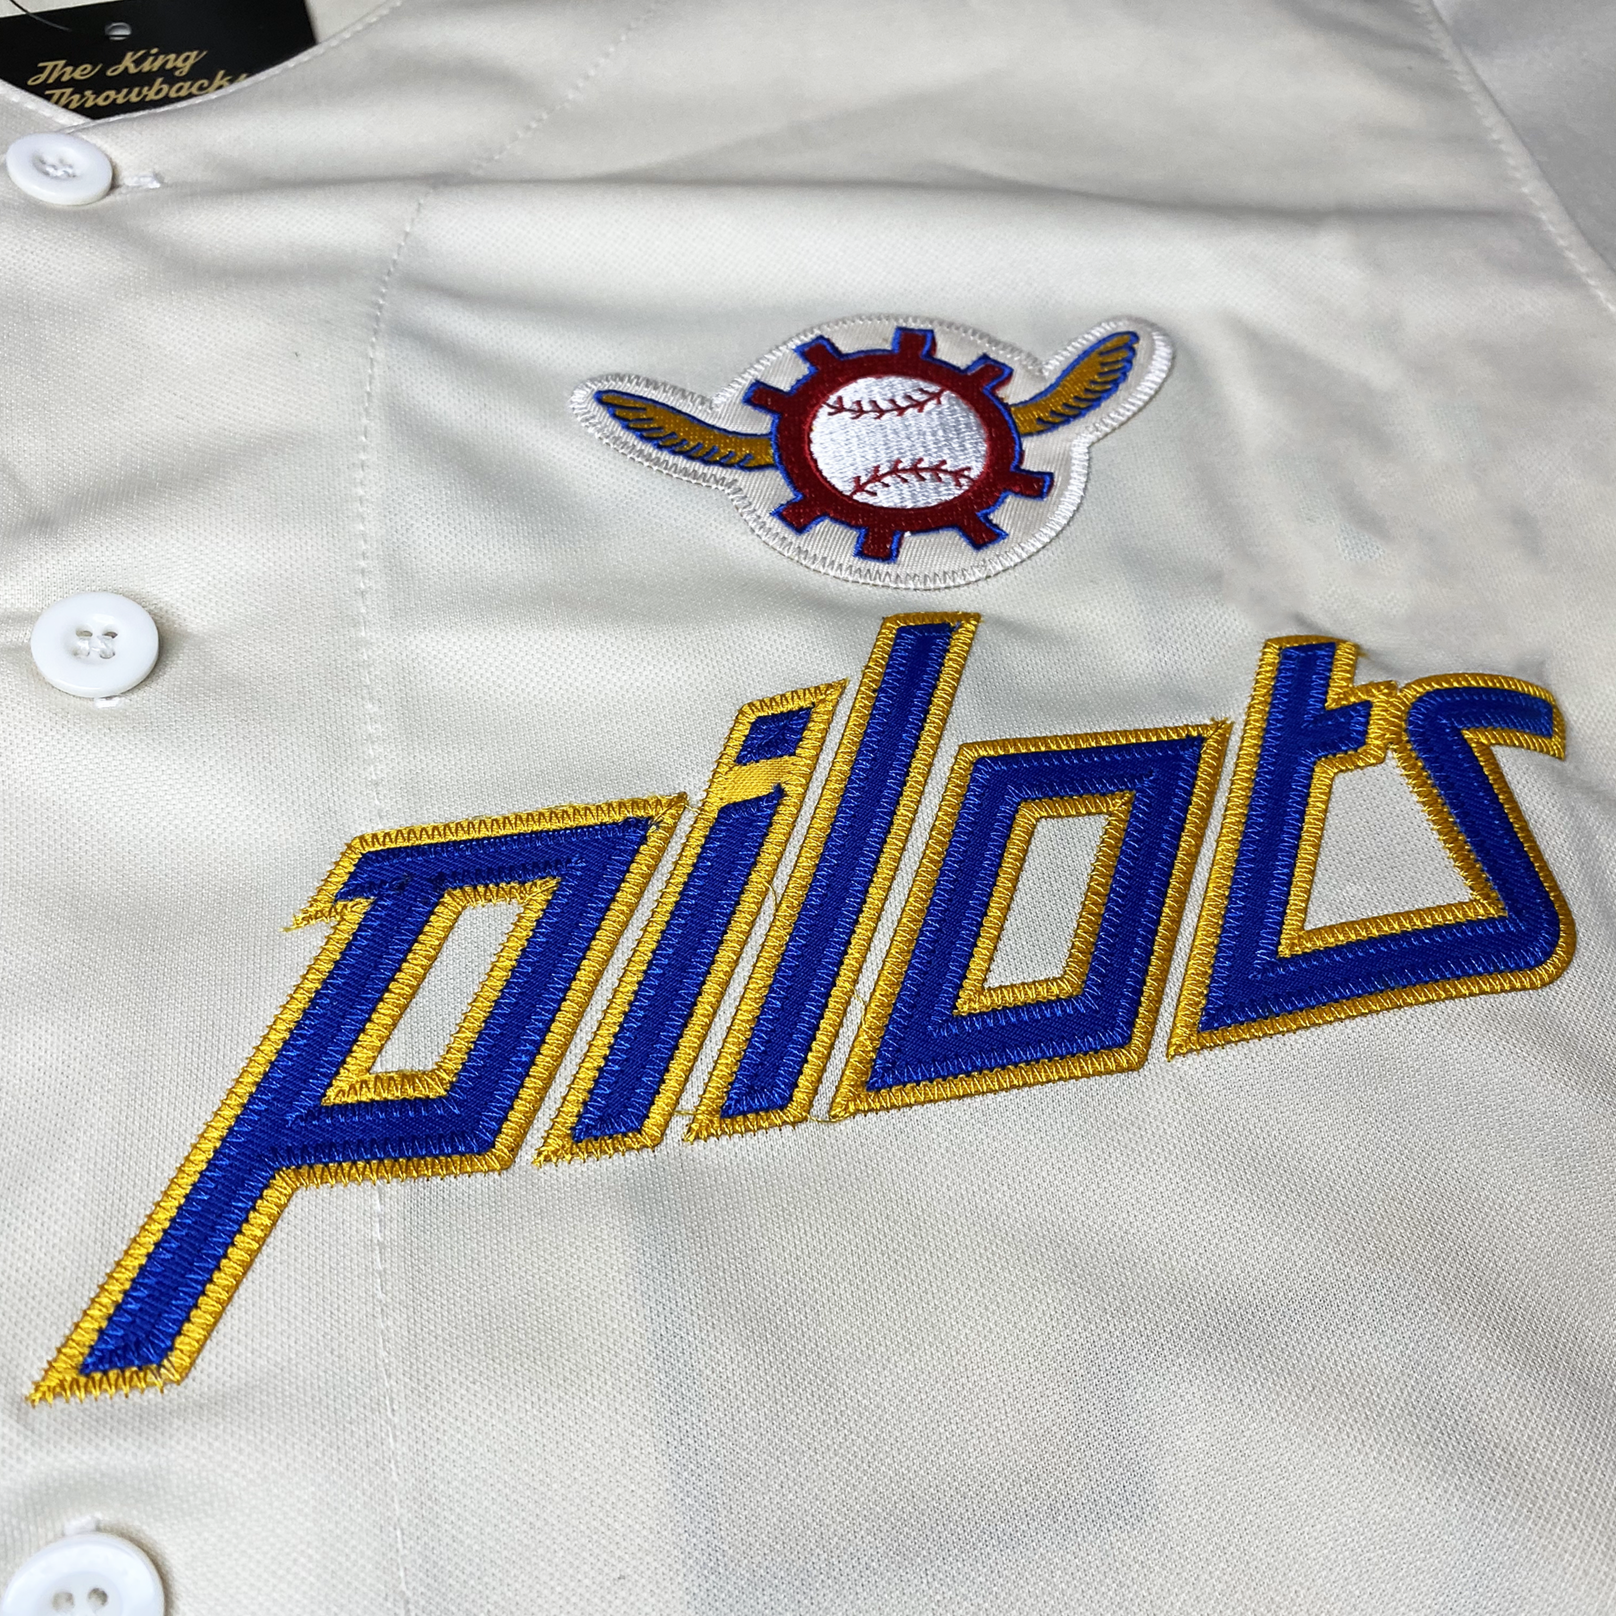 The Seattle Pilots throwback jerseys worn by the Seattle Mariners